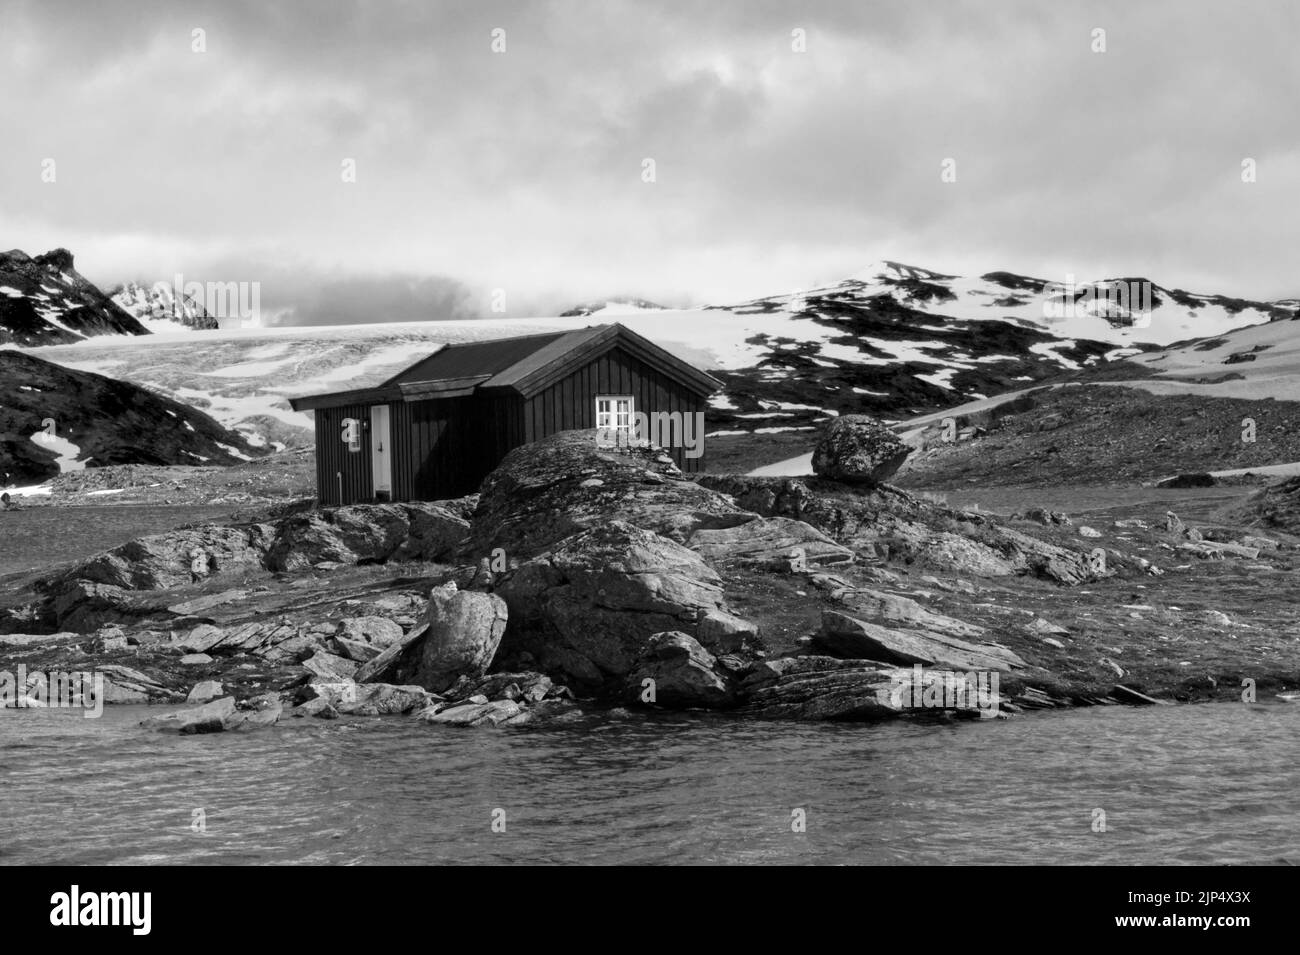 Norwegian black wooden house in the Nordic landscape by a glacial lake in black and white Stock Photo